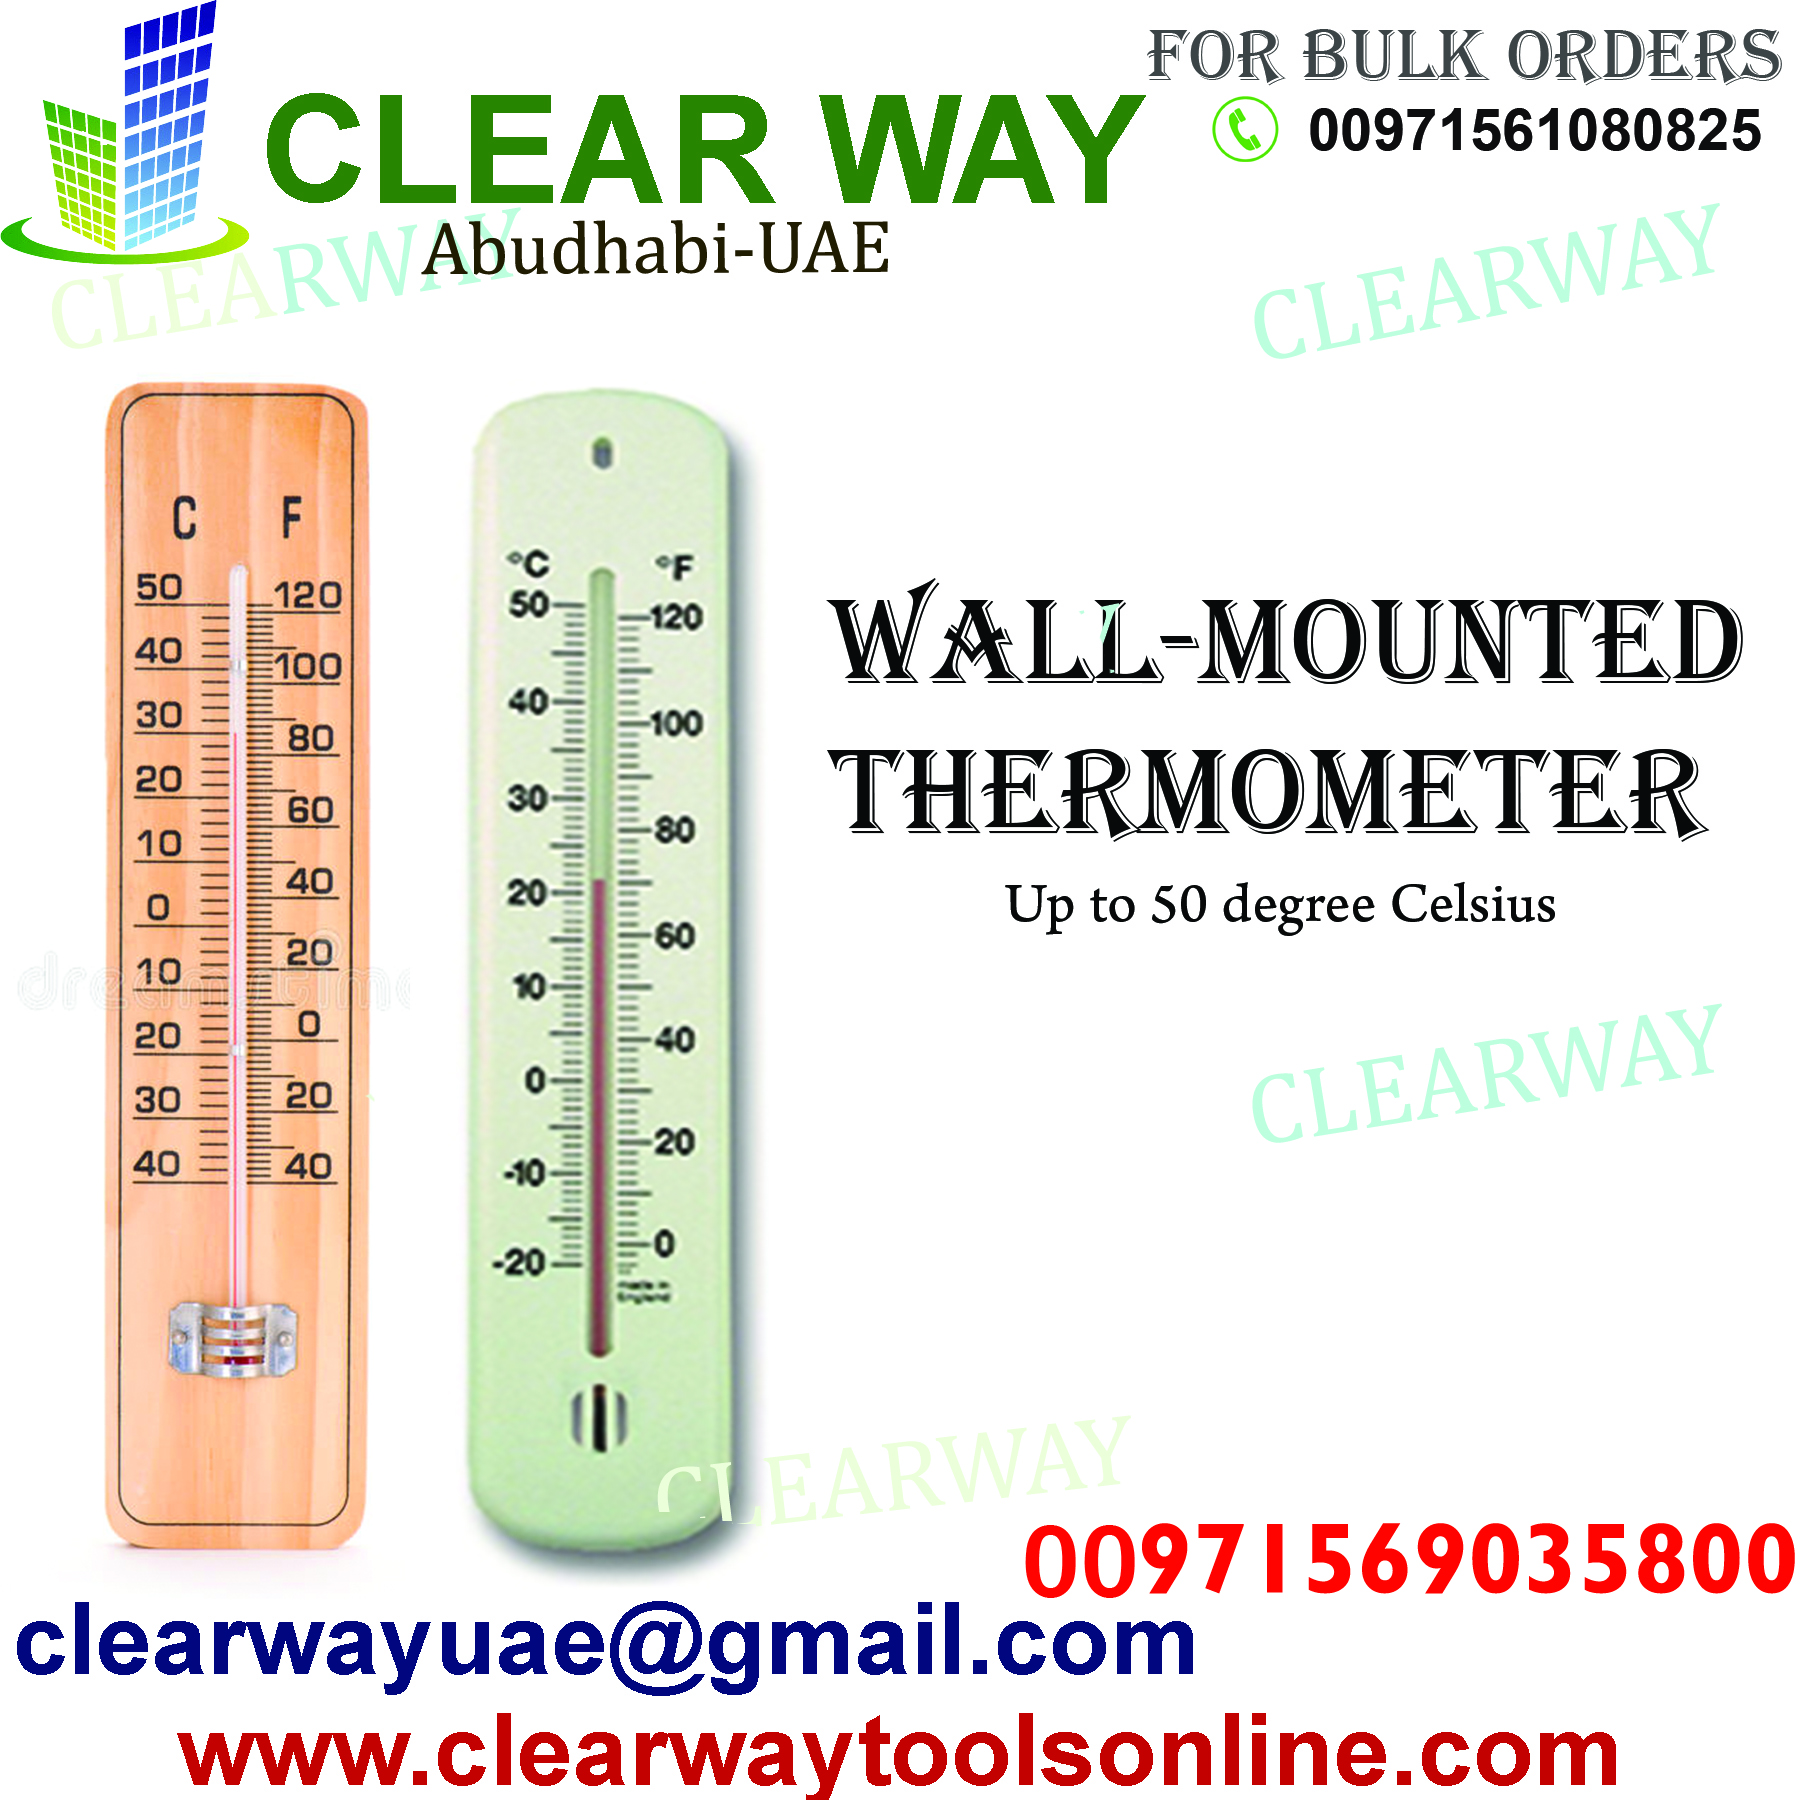 WALL MOUNTED THERMOMETER DEALER IN MUSSAFAH , ABUDHABI , UAE BY CLEARWAY